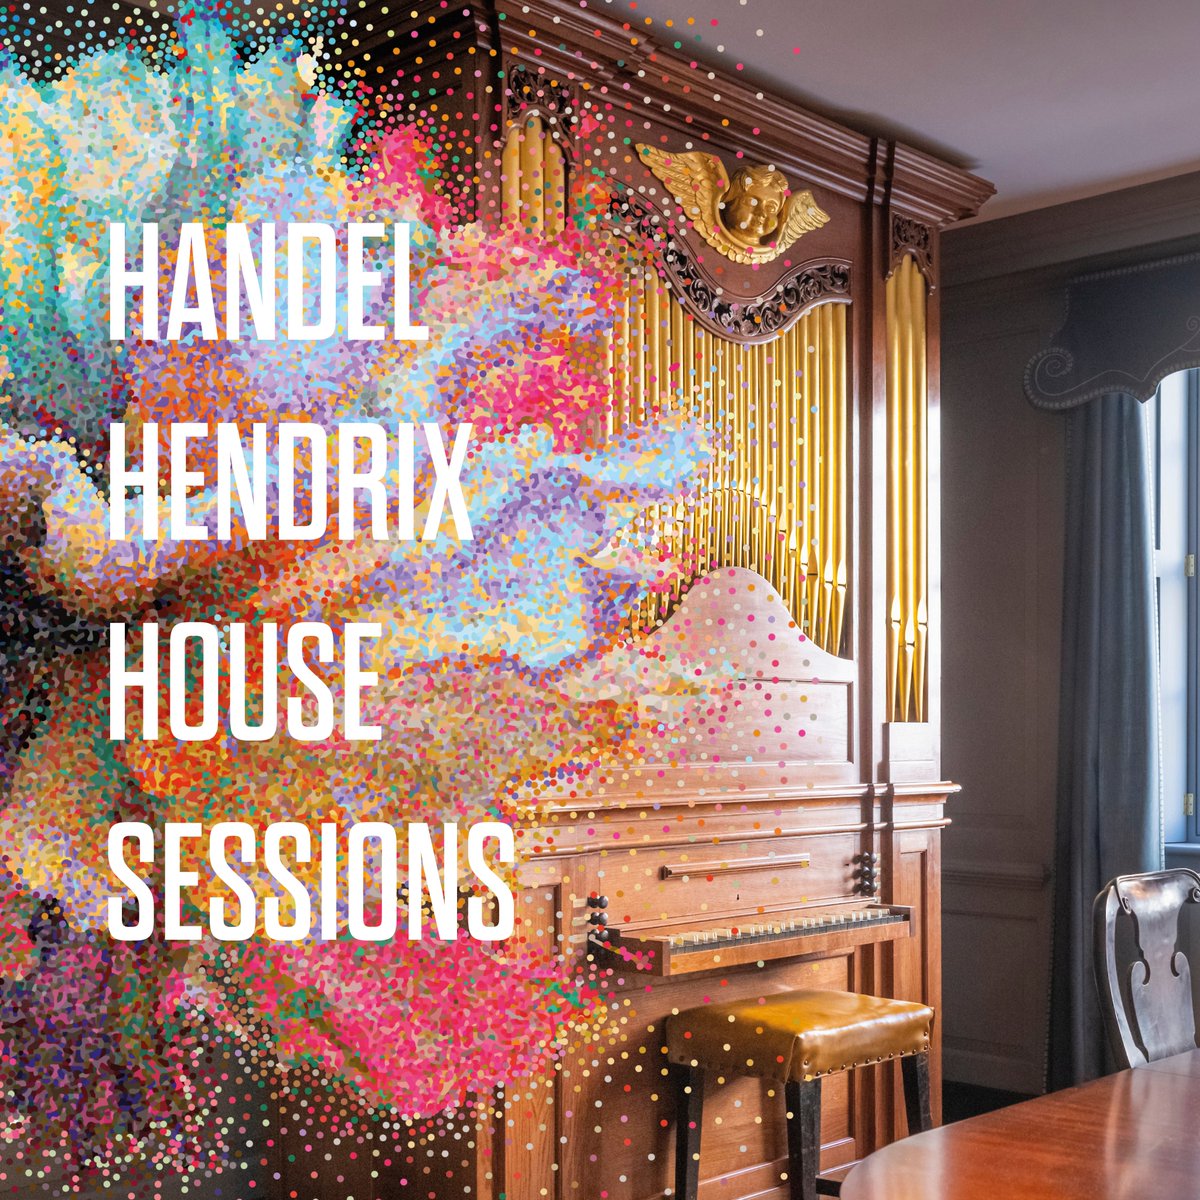 Tonight, join us for an exclusive late opening of @HandelHendrix House and immerse yourself in Handel's world🏠 The evening includes pop-up performances from violinist Max Baillie, @OliverWassHarp and Fatima Lahham as well as talks throughout the house london-handel-festival.com/show/2024-hand…